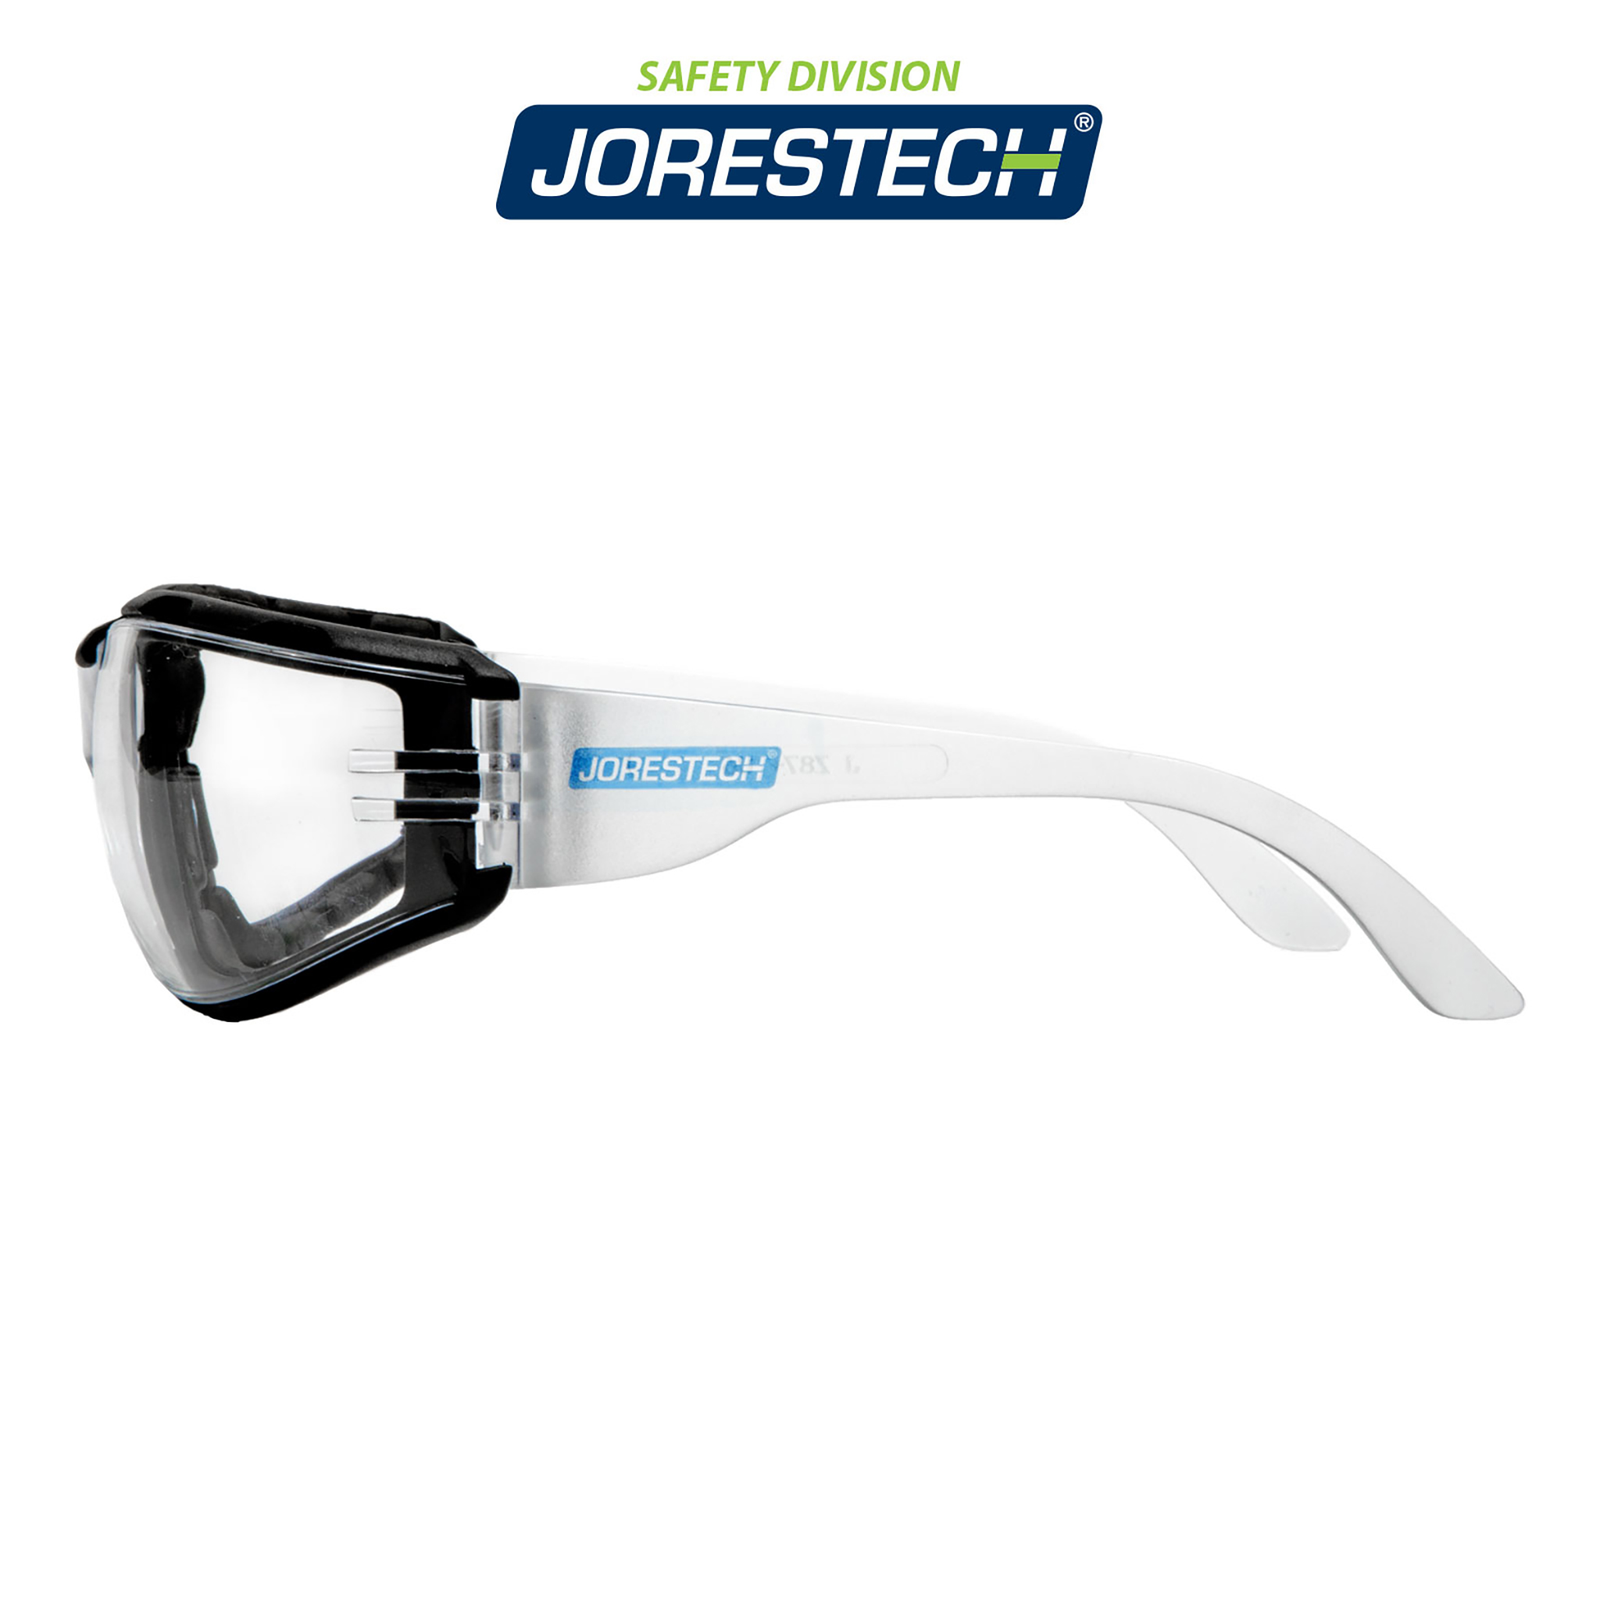 Side view of the JORESTECH ANSI Z87+ complaint clear safety glasses for high impact protection with a black foam gasket, over white background. .